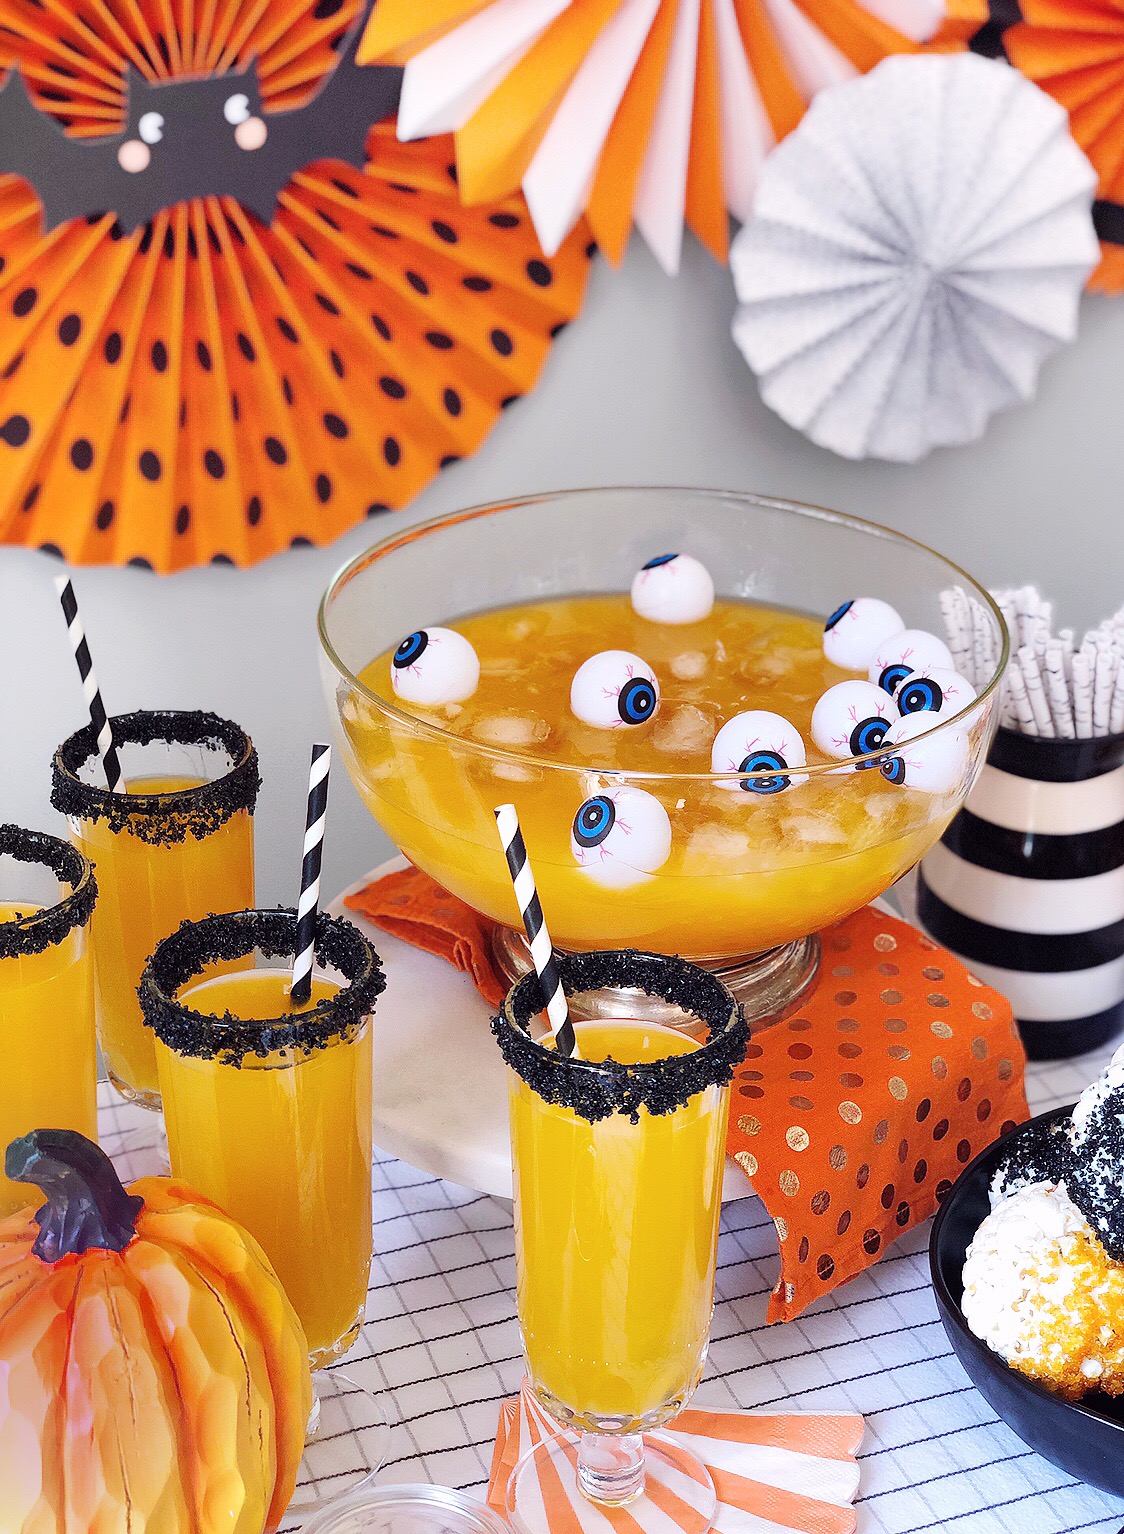 10 Terrifying Halloween Decorations for Your Party